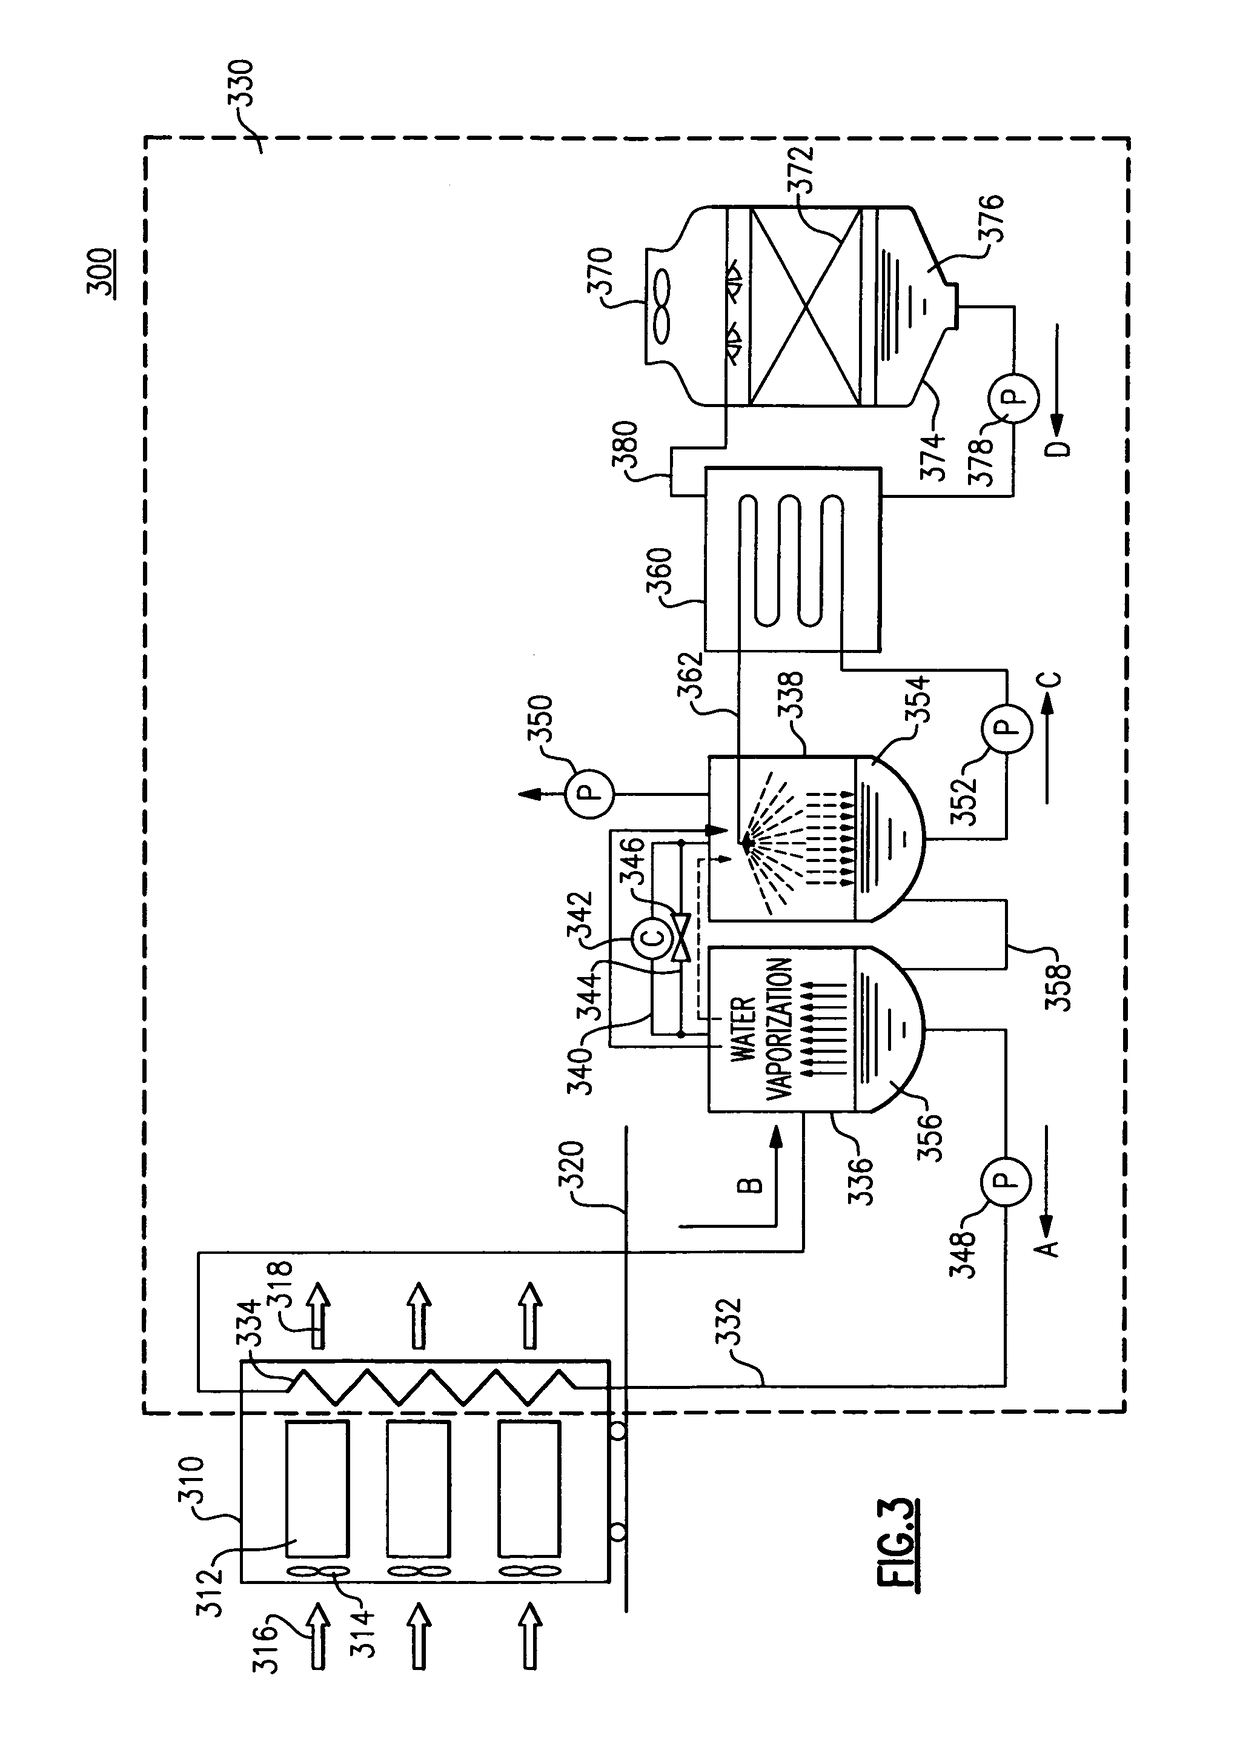 Facilitating cooling of an electronics rack employing water vapor compression system